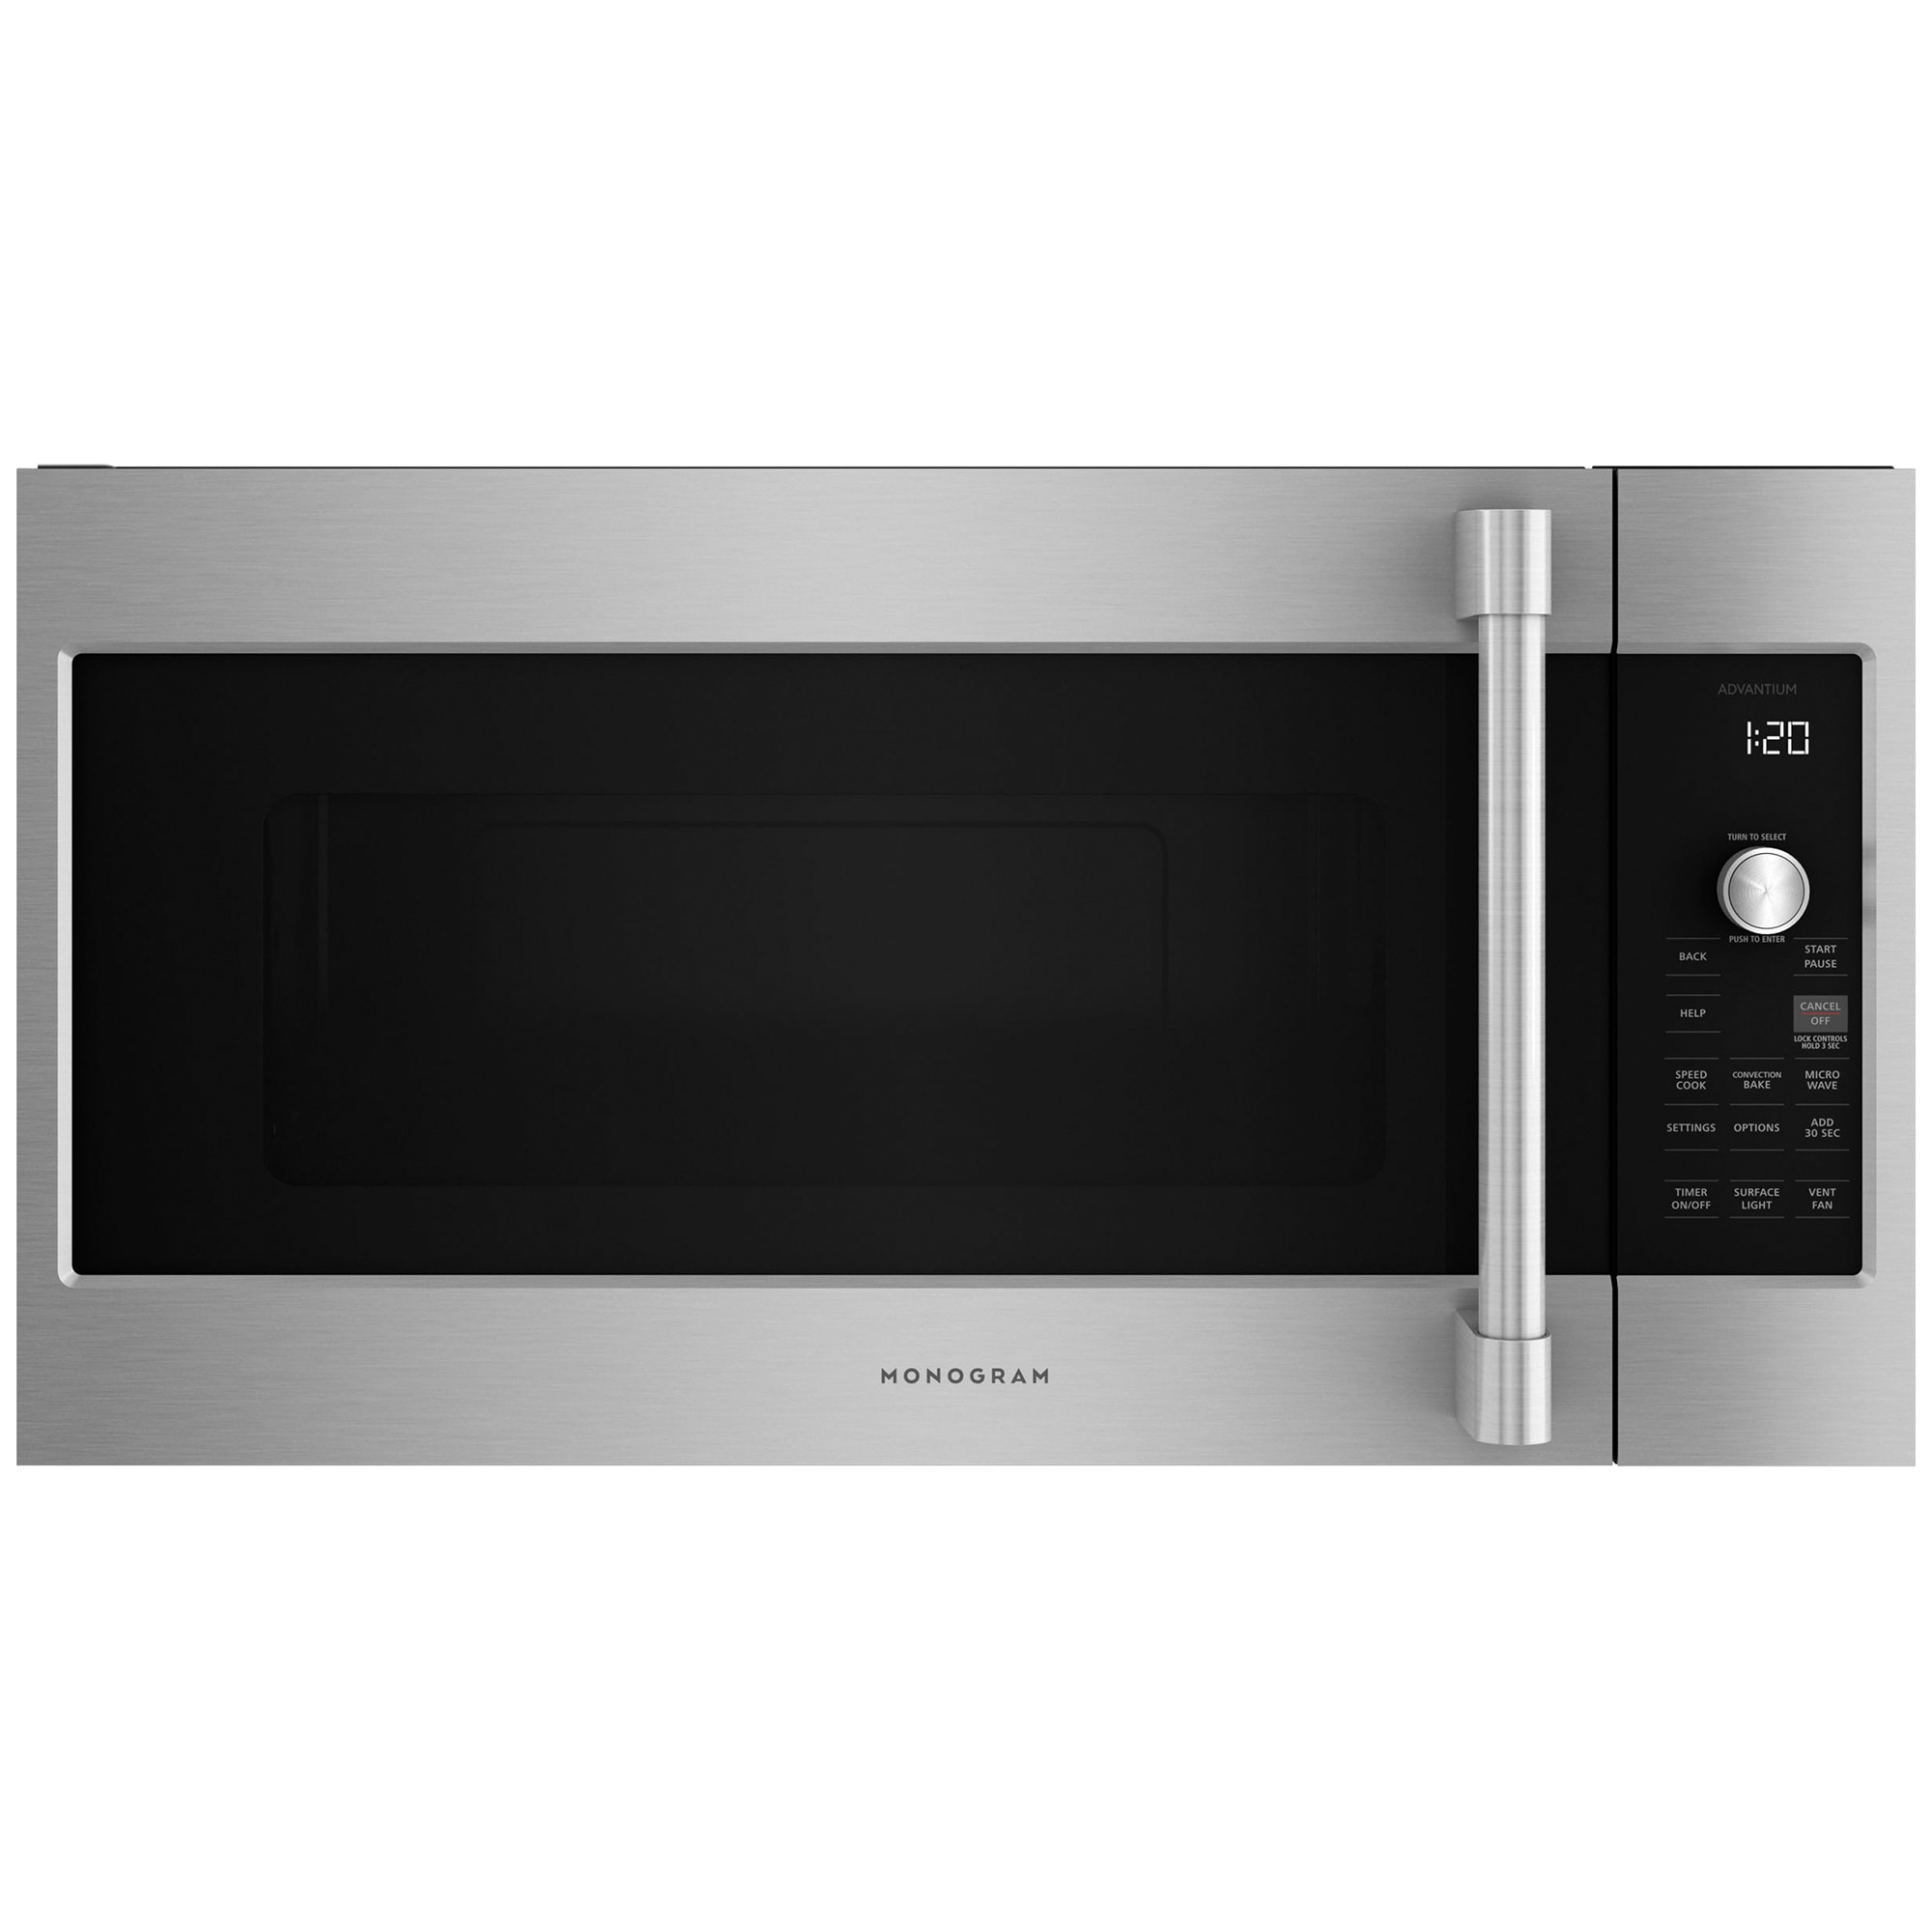 Monogram 30" 1.7 Cu. Ft. Over-the-Range Microwave with 10 Power Levels ...